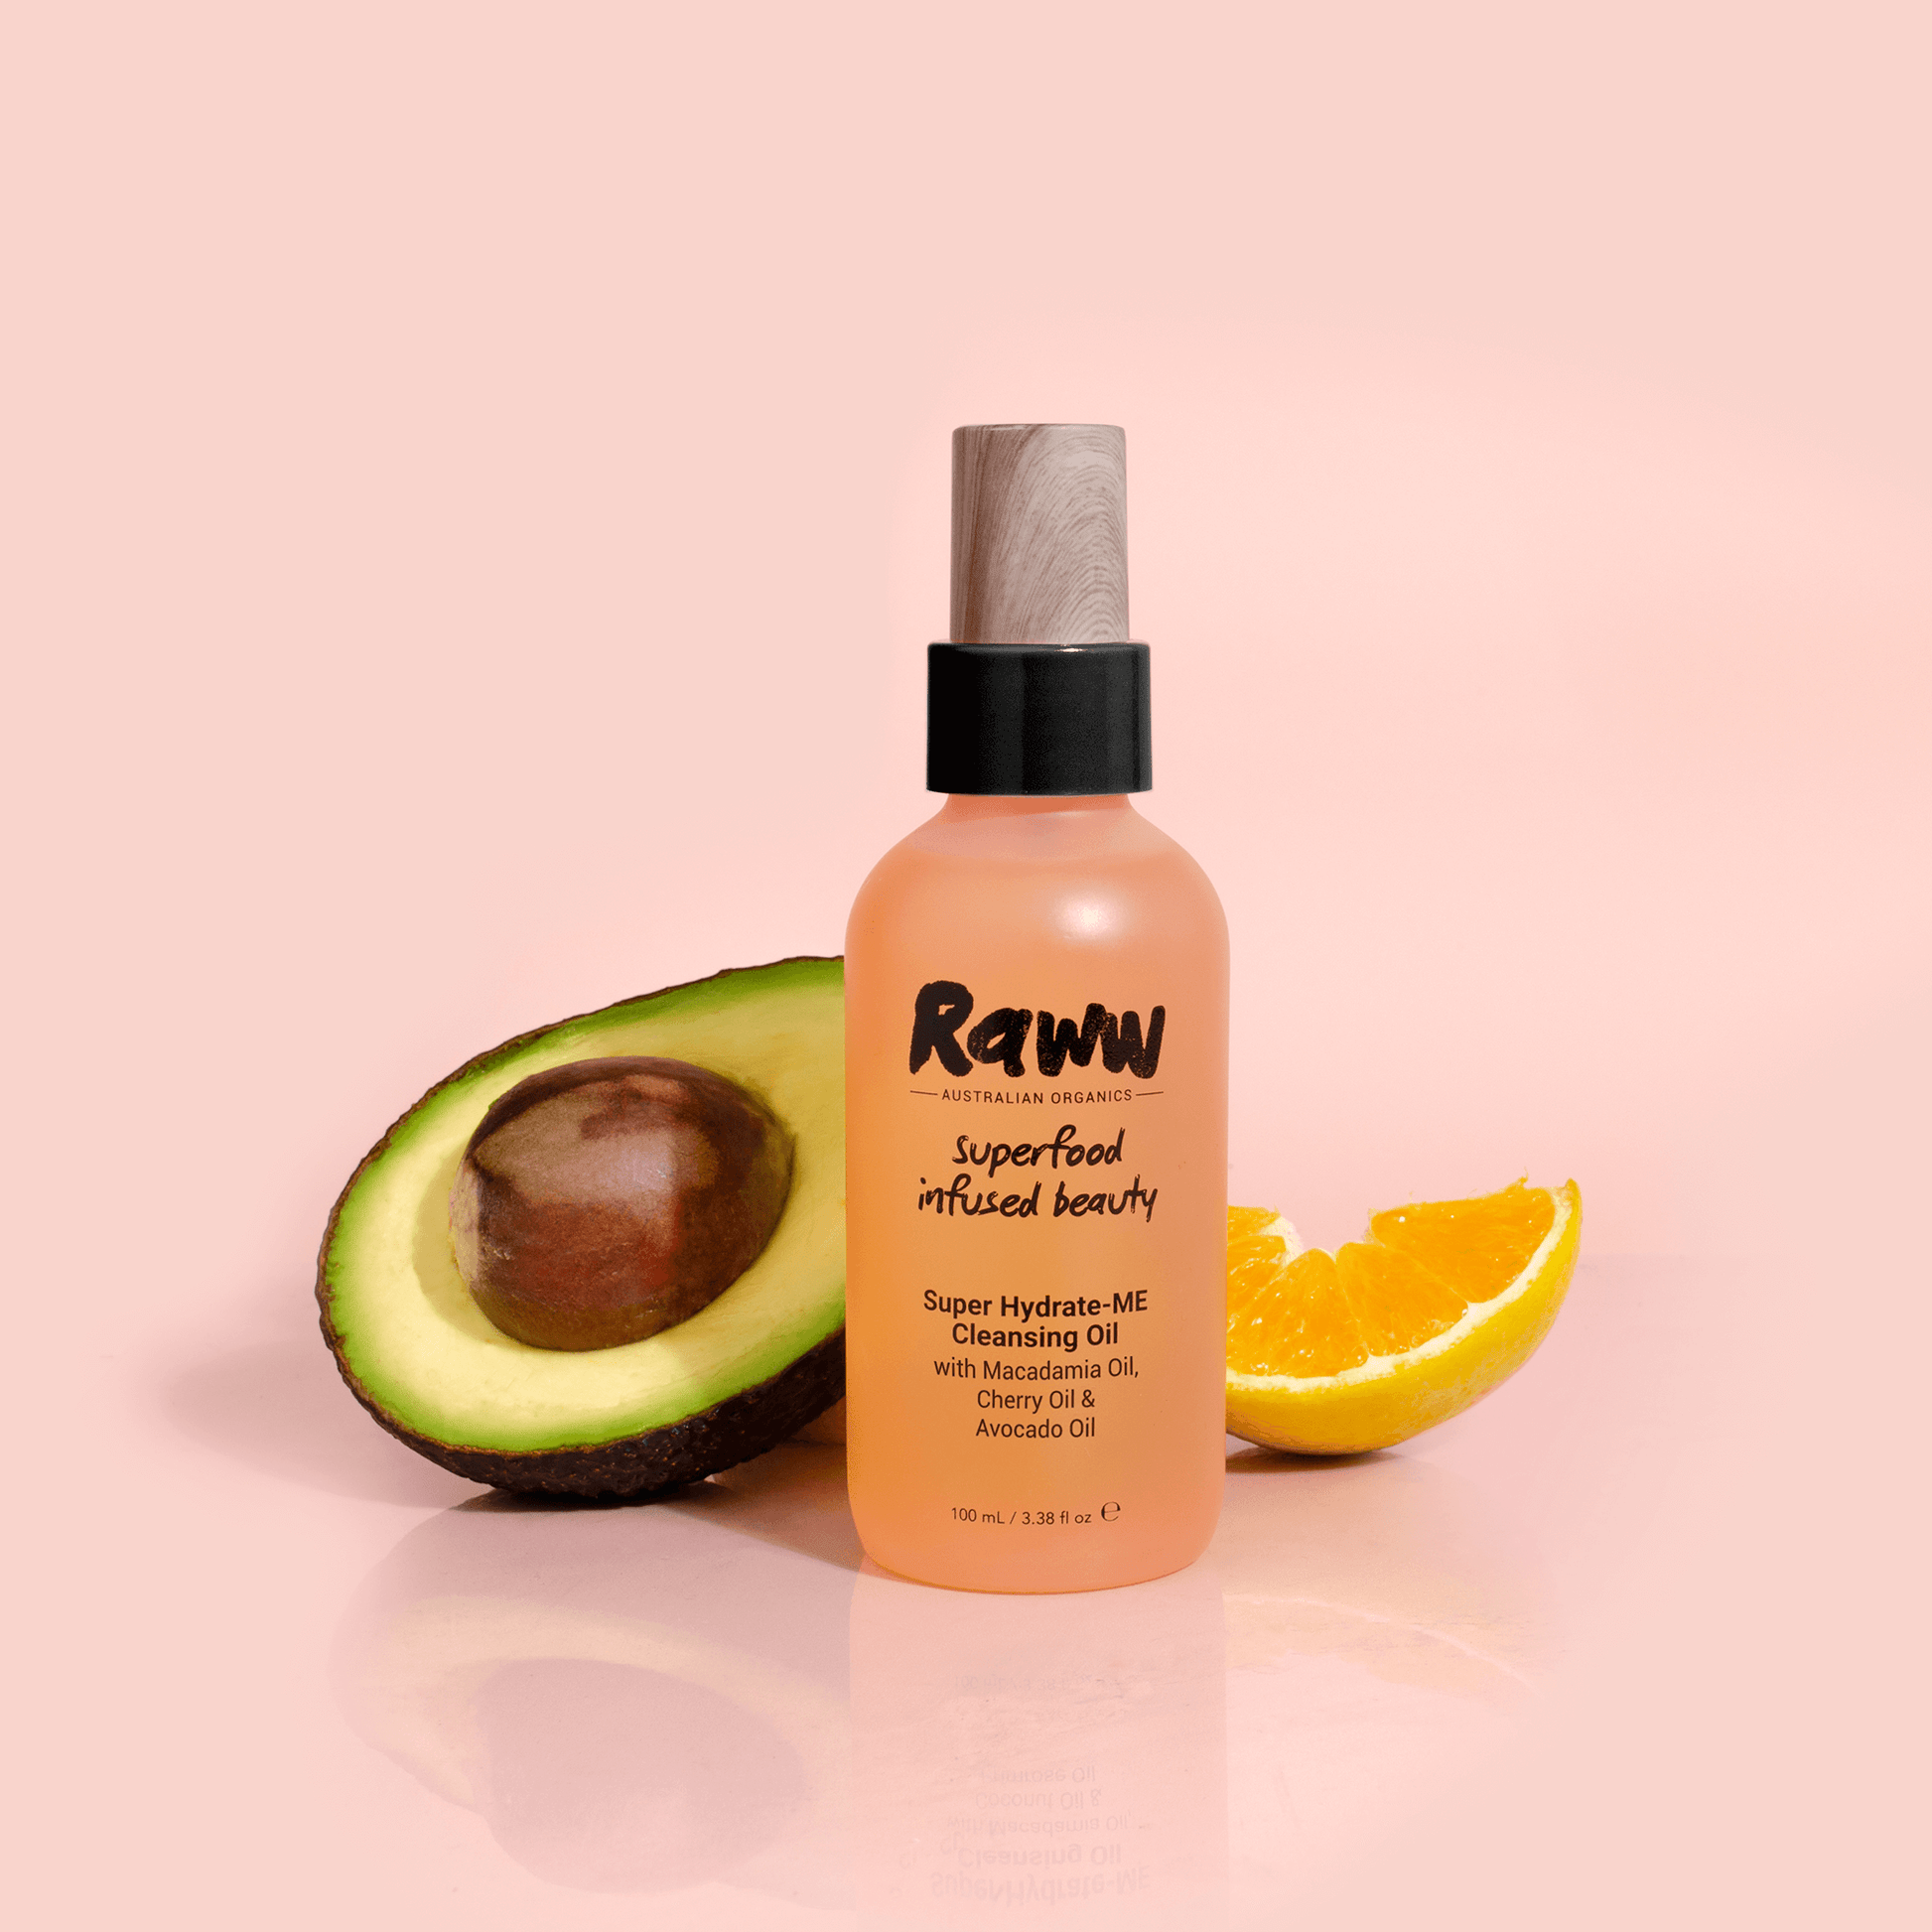 Super Hydrate-ME Cleansing Oil | RAWW Cosmetics | Lifestyle 01